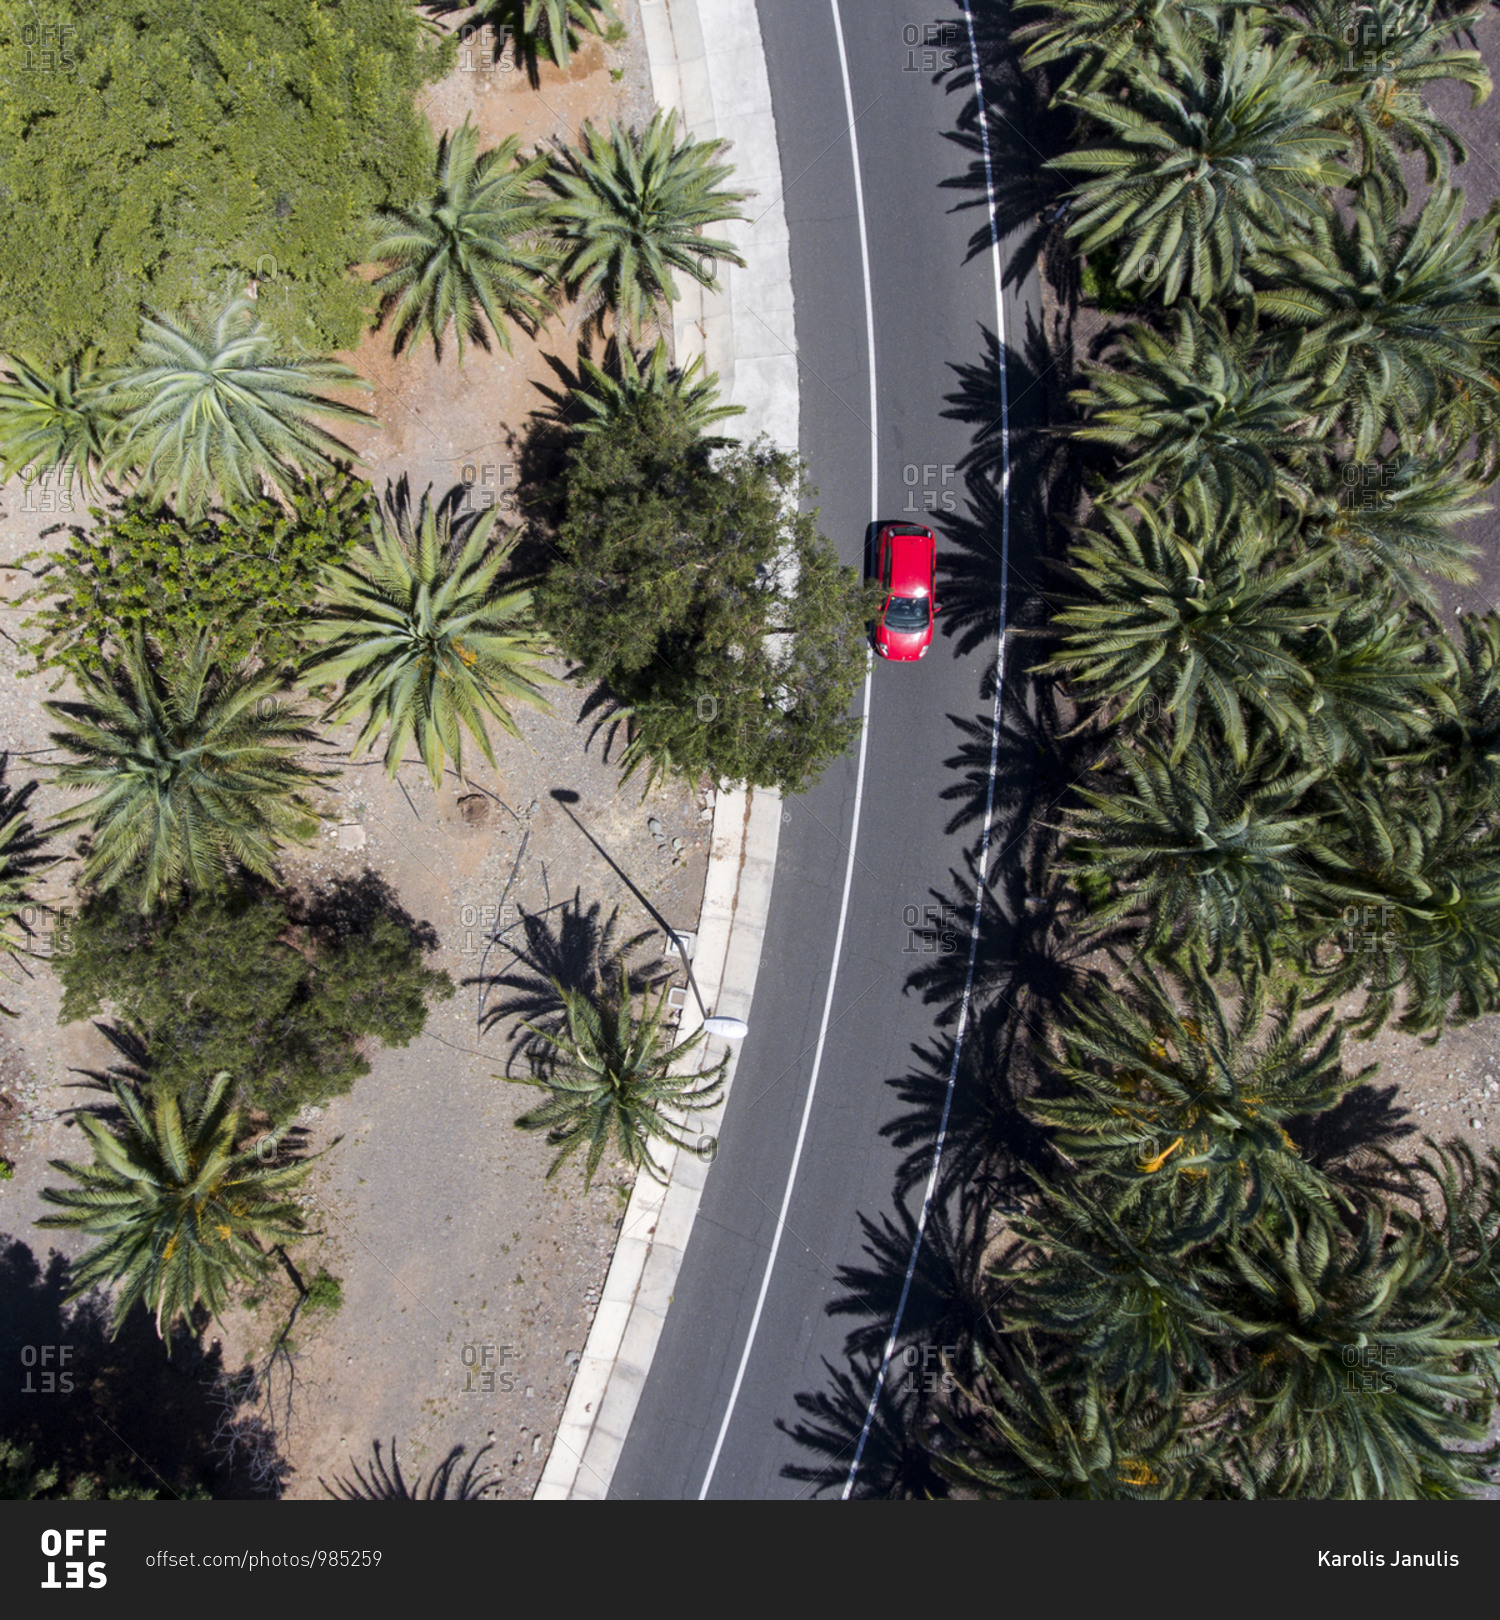 Aerial view of a red car driving on city street lined with palm trees